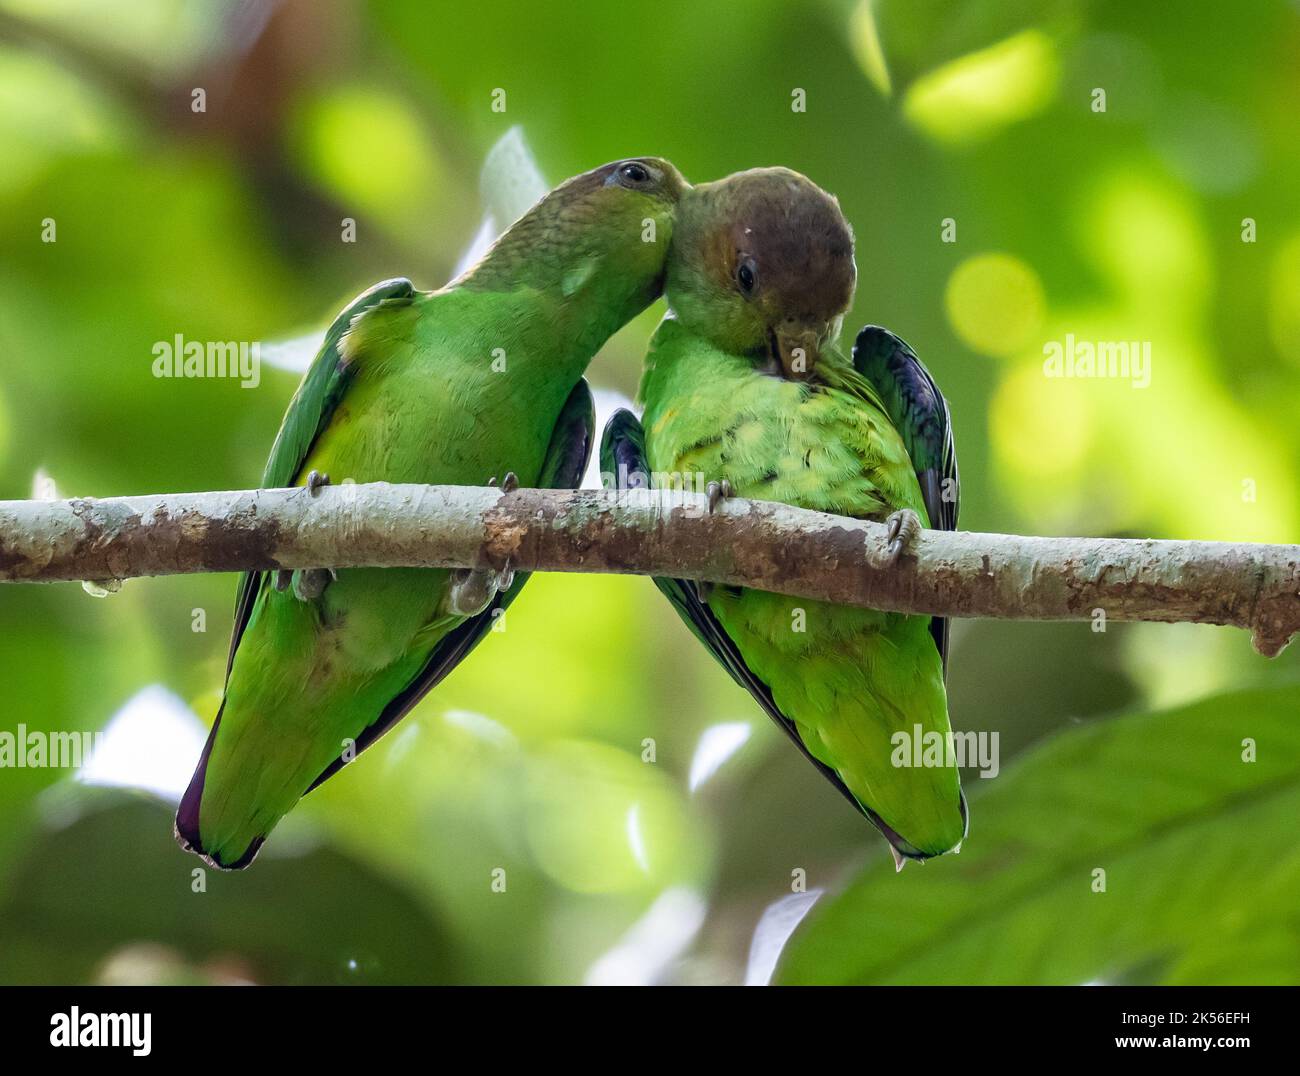 A pair Sapphire-rumped Parrotlets (Touit purpuratus) grooming each other on a branch. Amazonas, Brazil. Stock Photo